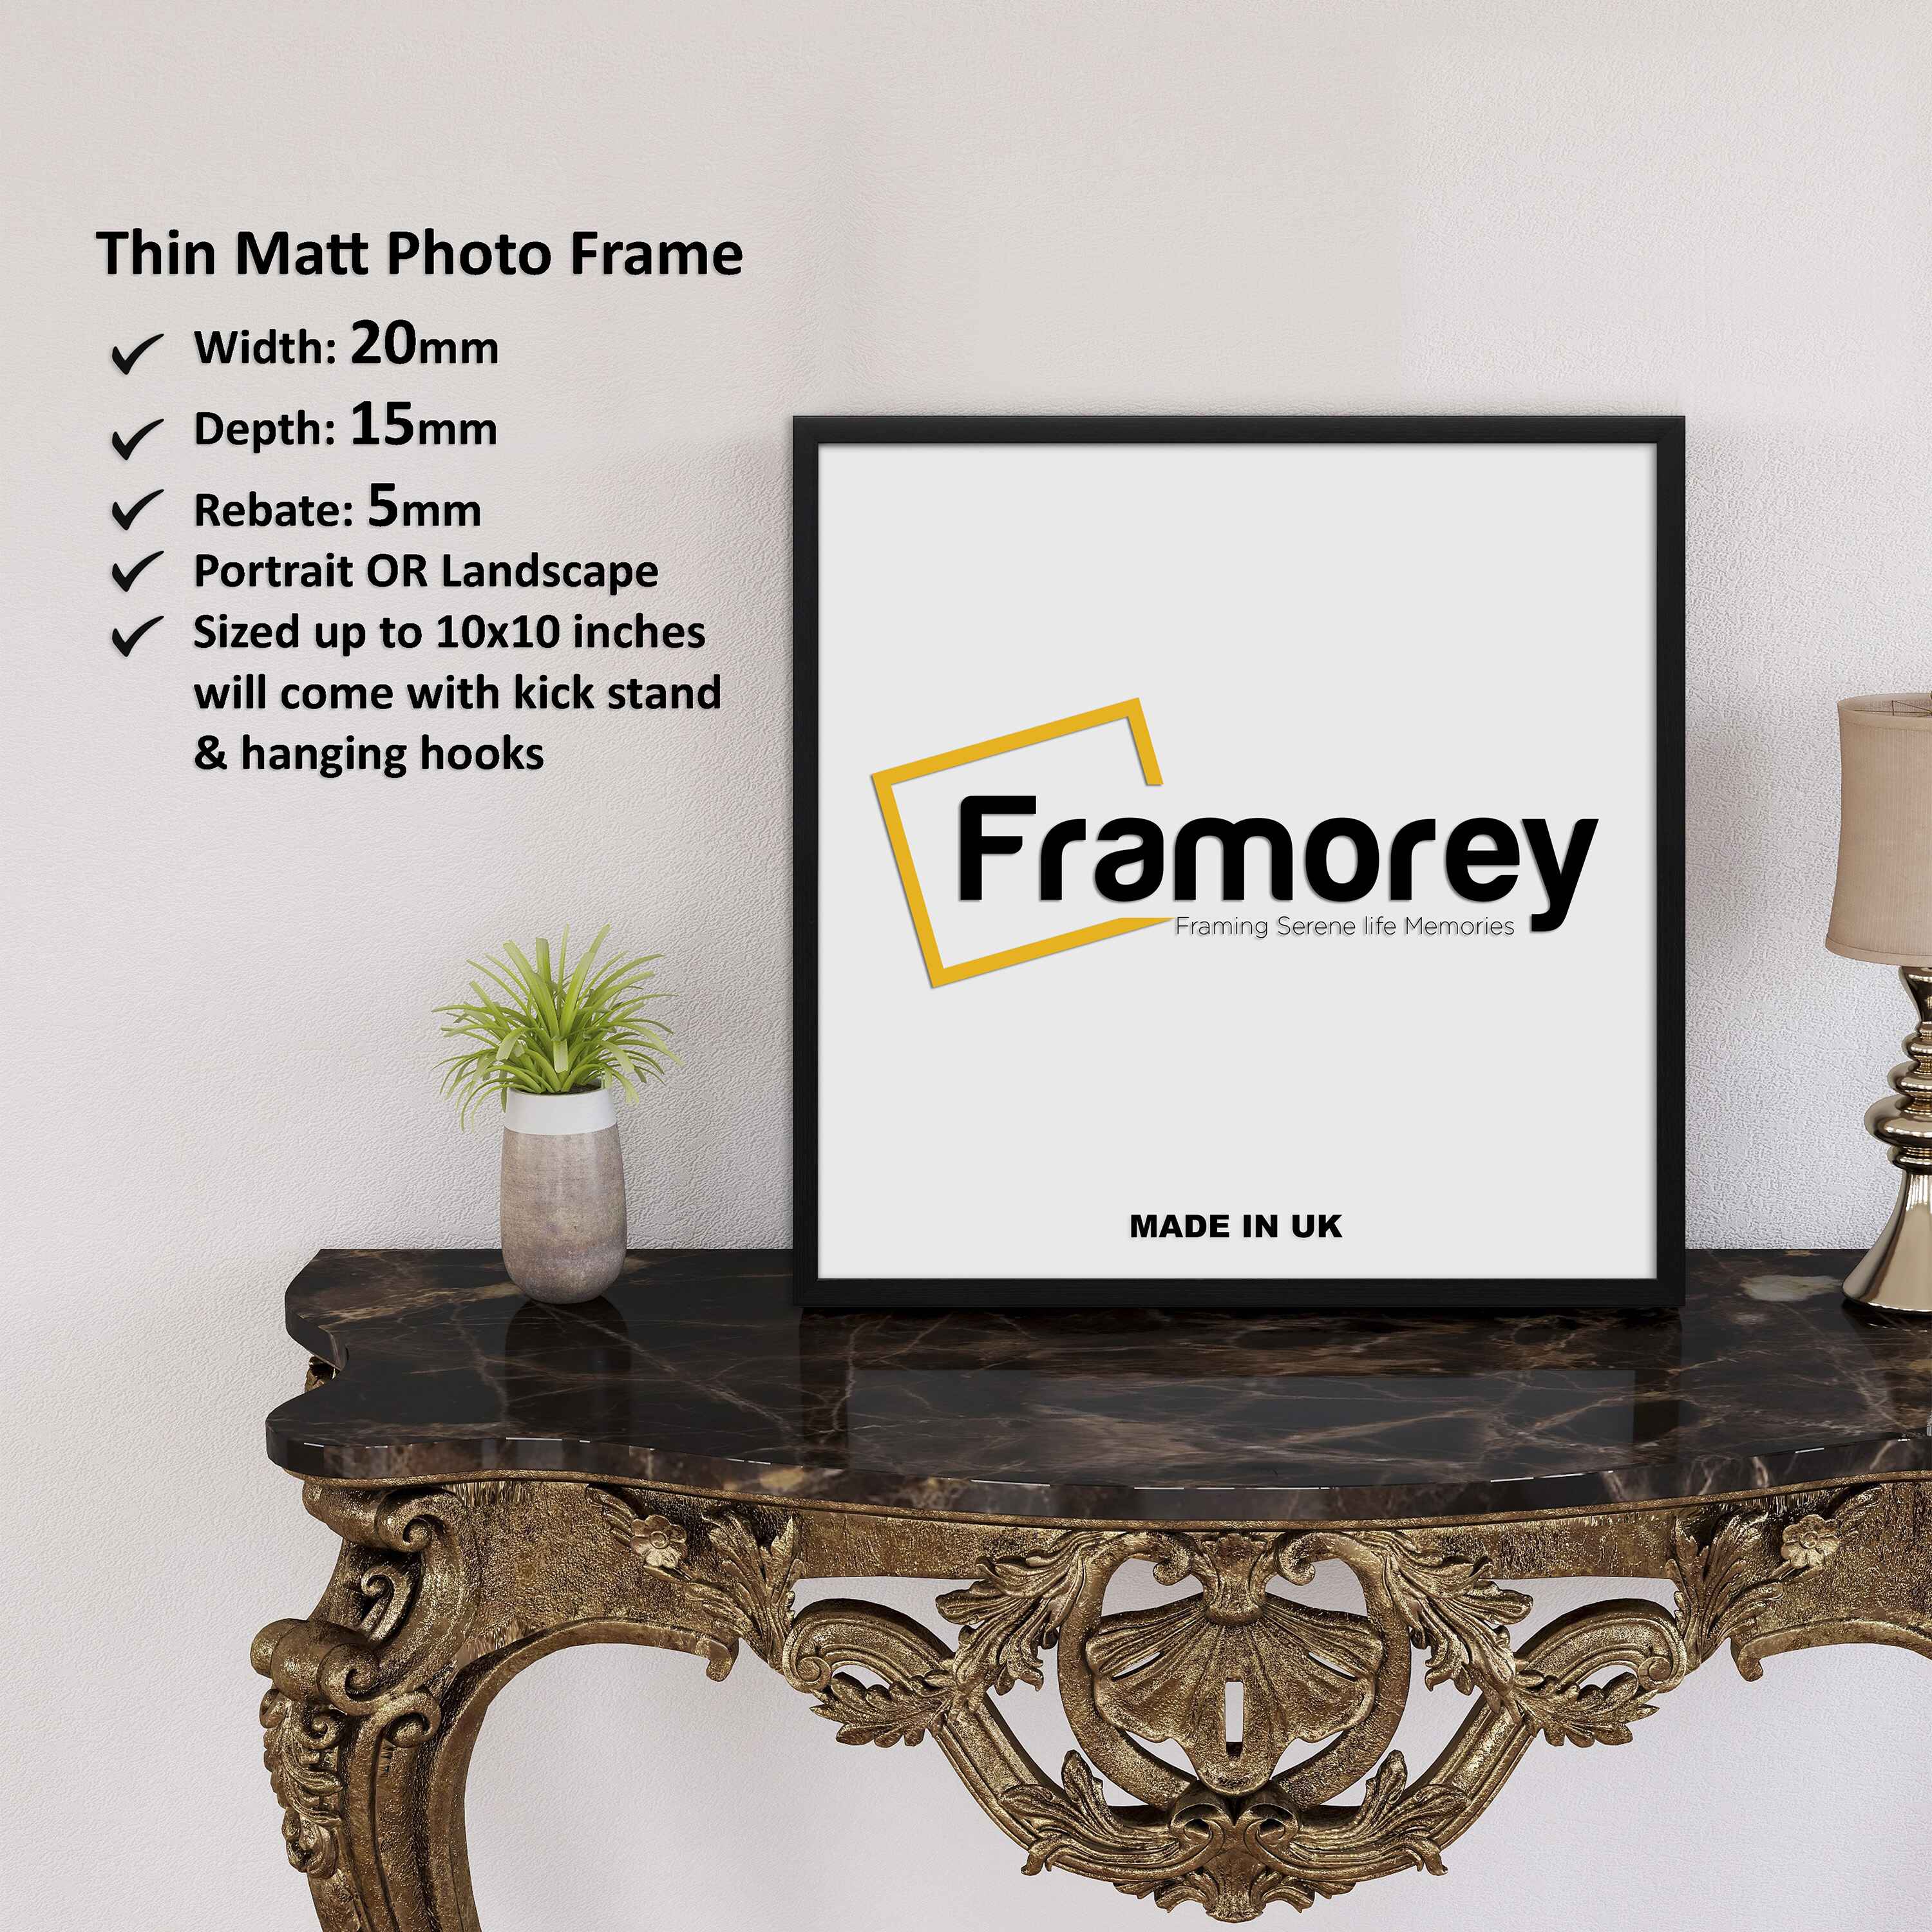 6x6 Frame with Mat - Silver 9x9 Frame Wood Made to Display Print or Poster  Measuring 6 x 6 Inches with Black Photo Mat